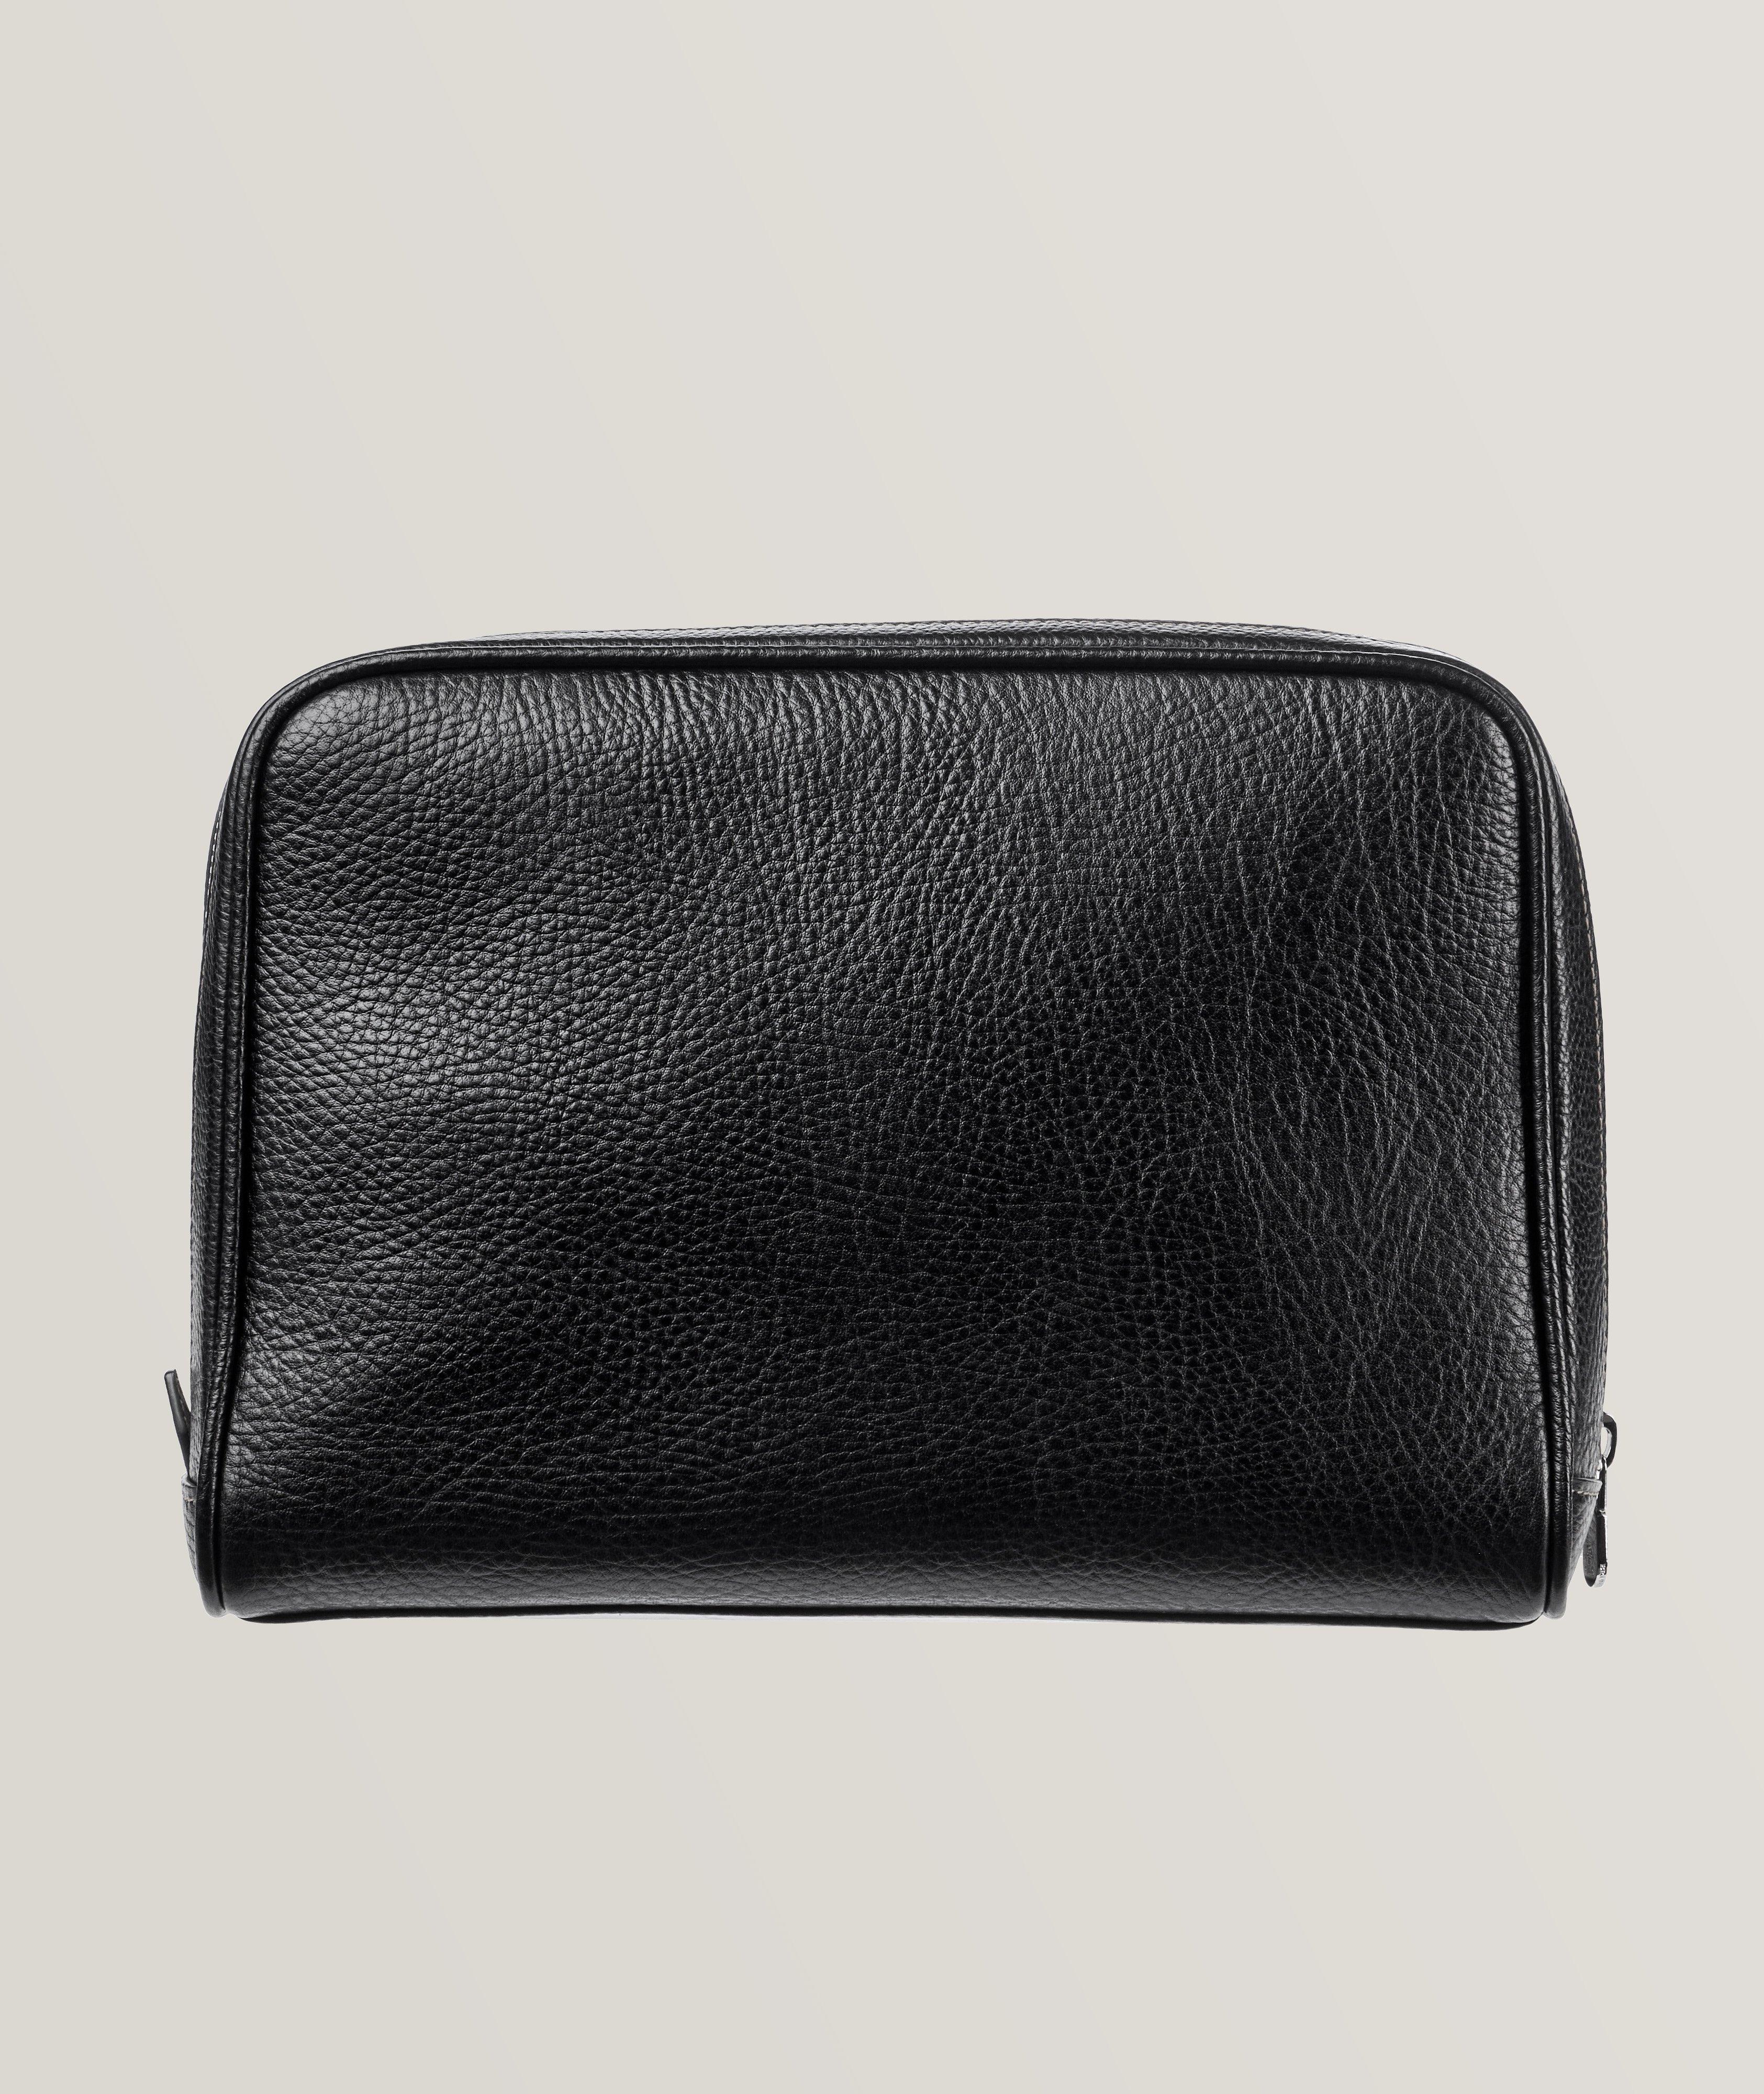 Grained Calfskin Toiletry Bag image 1